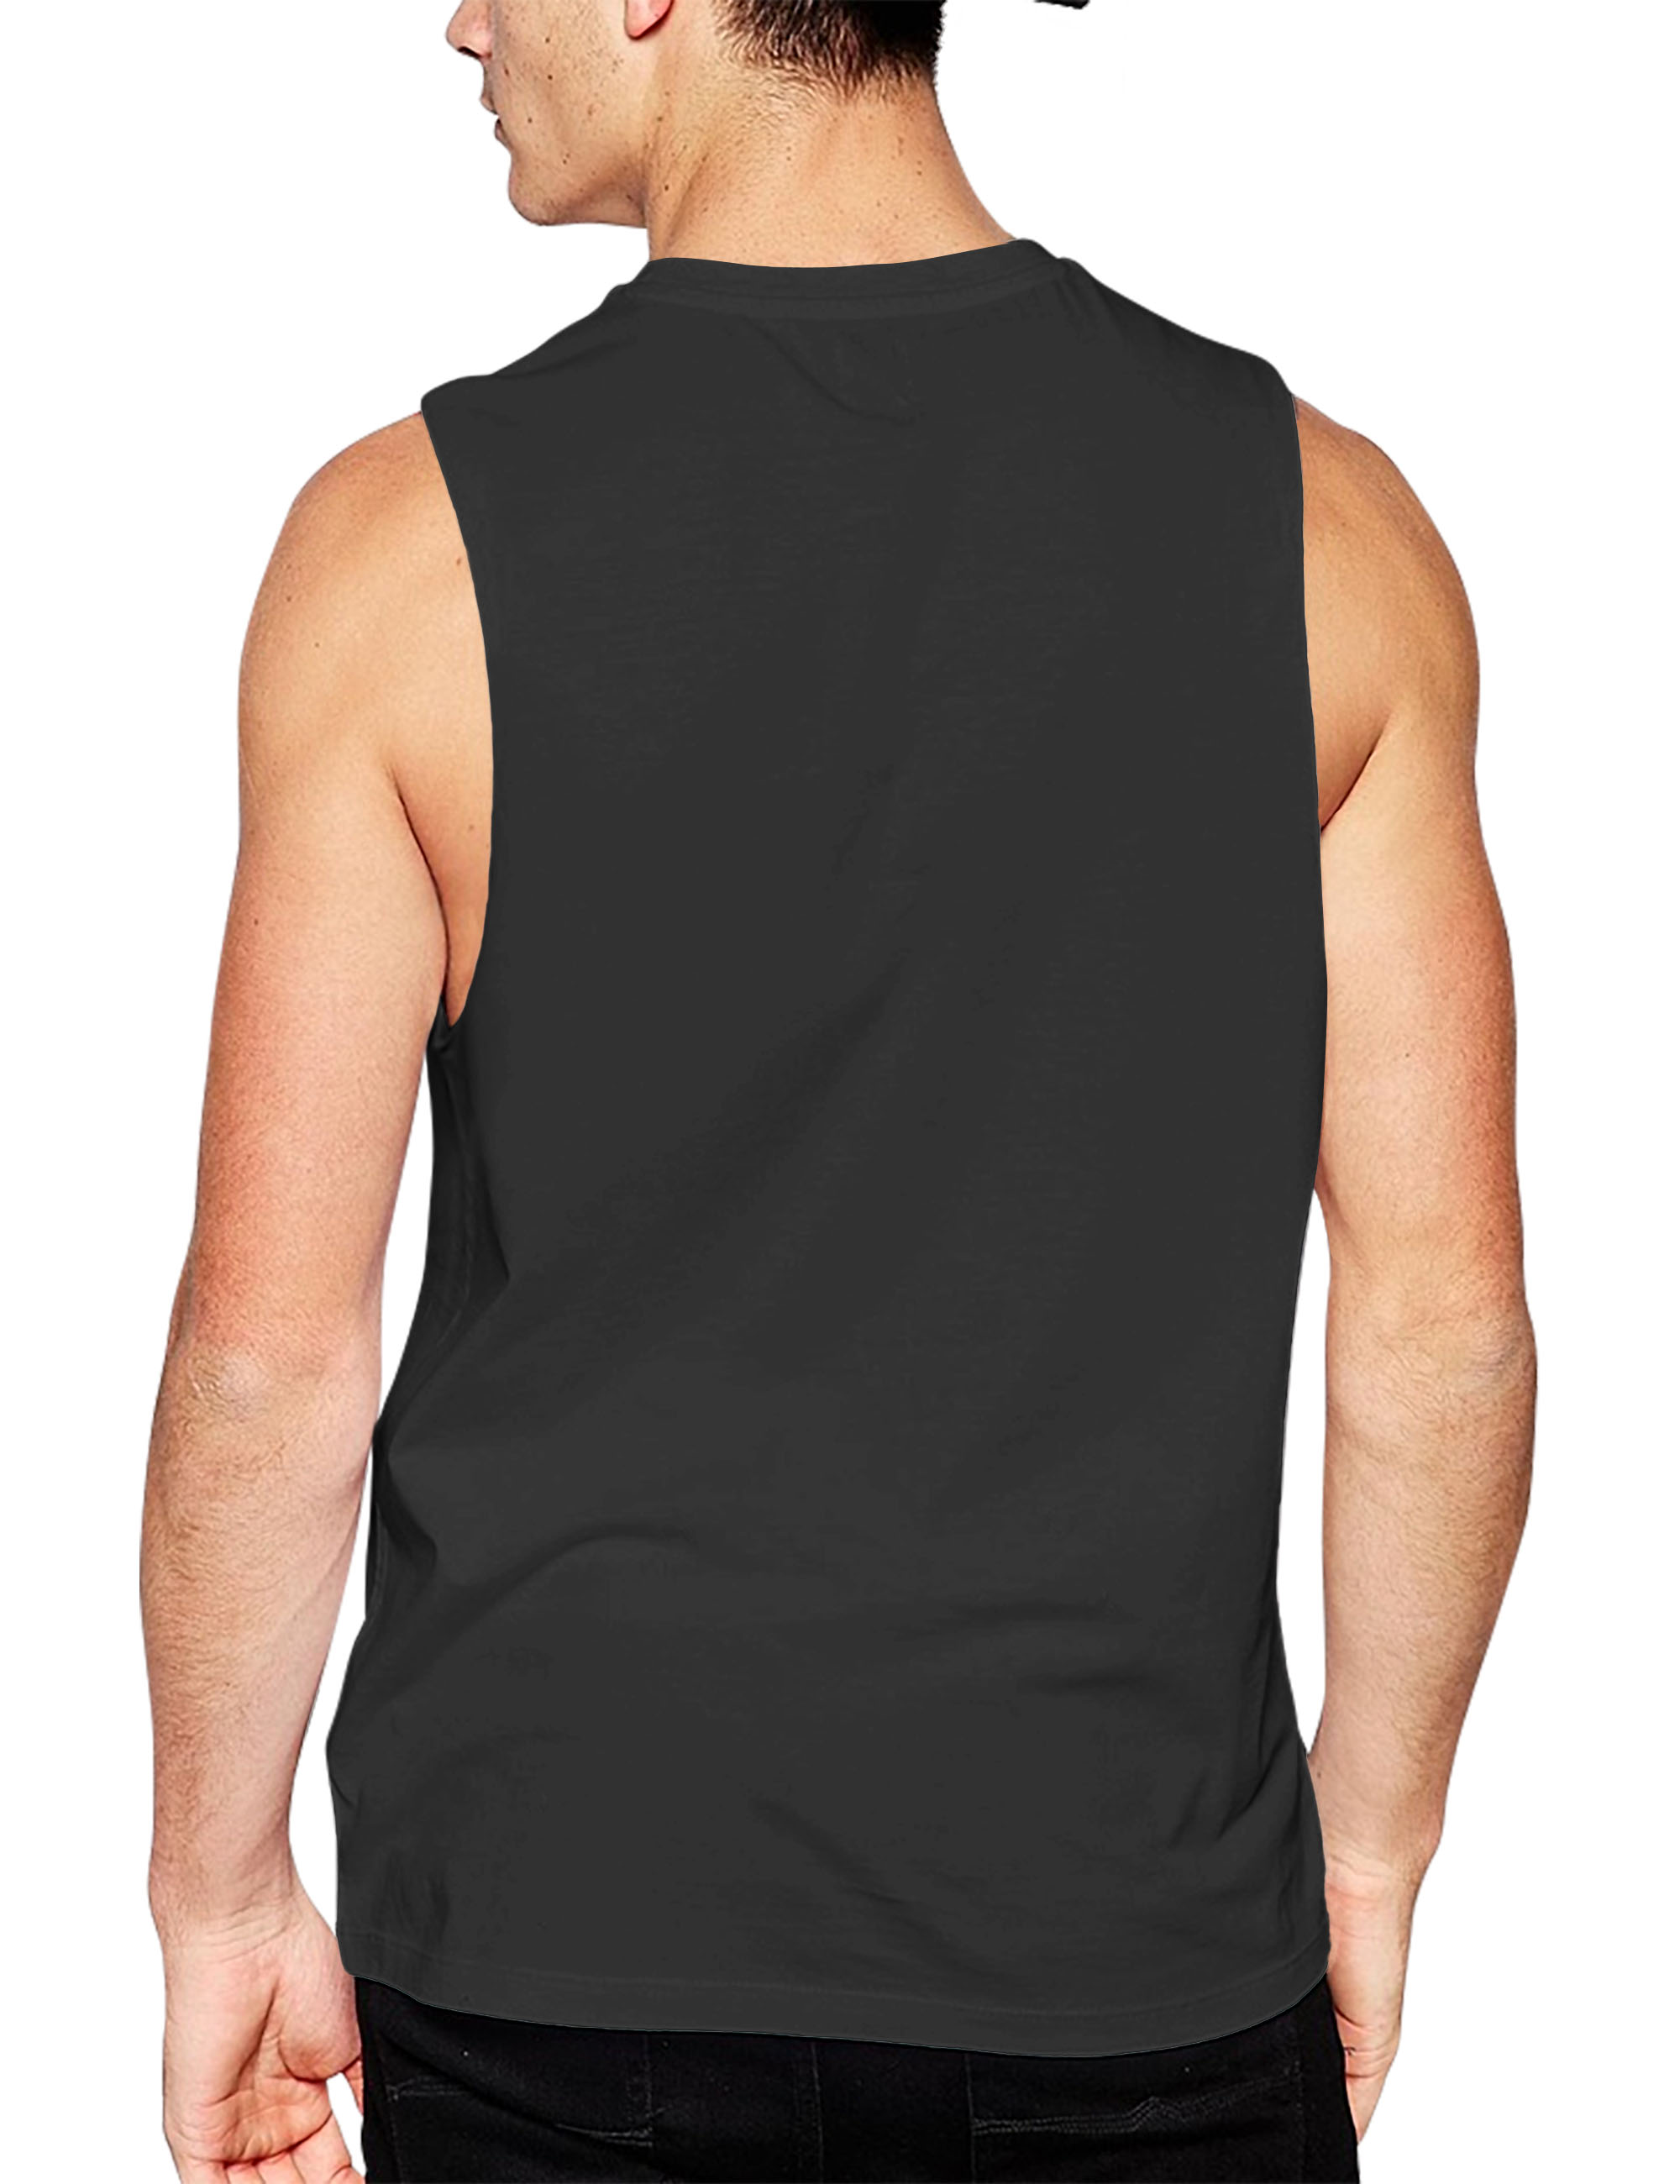 Hat and Beyond Men's Muscle Gym Tank Top Sleeveless T-Shirts - image 2 of 5